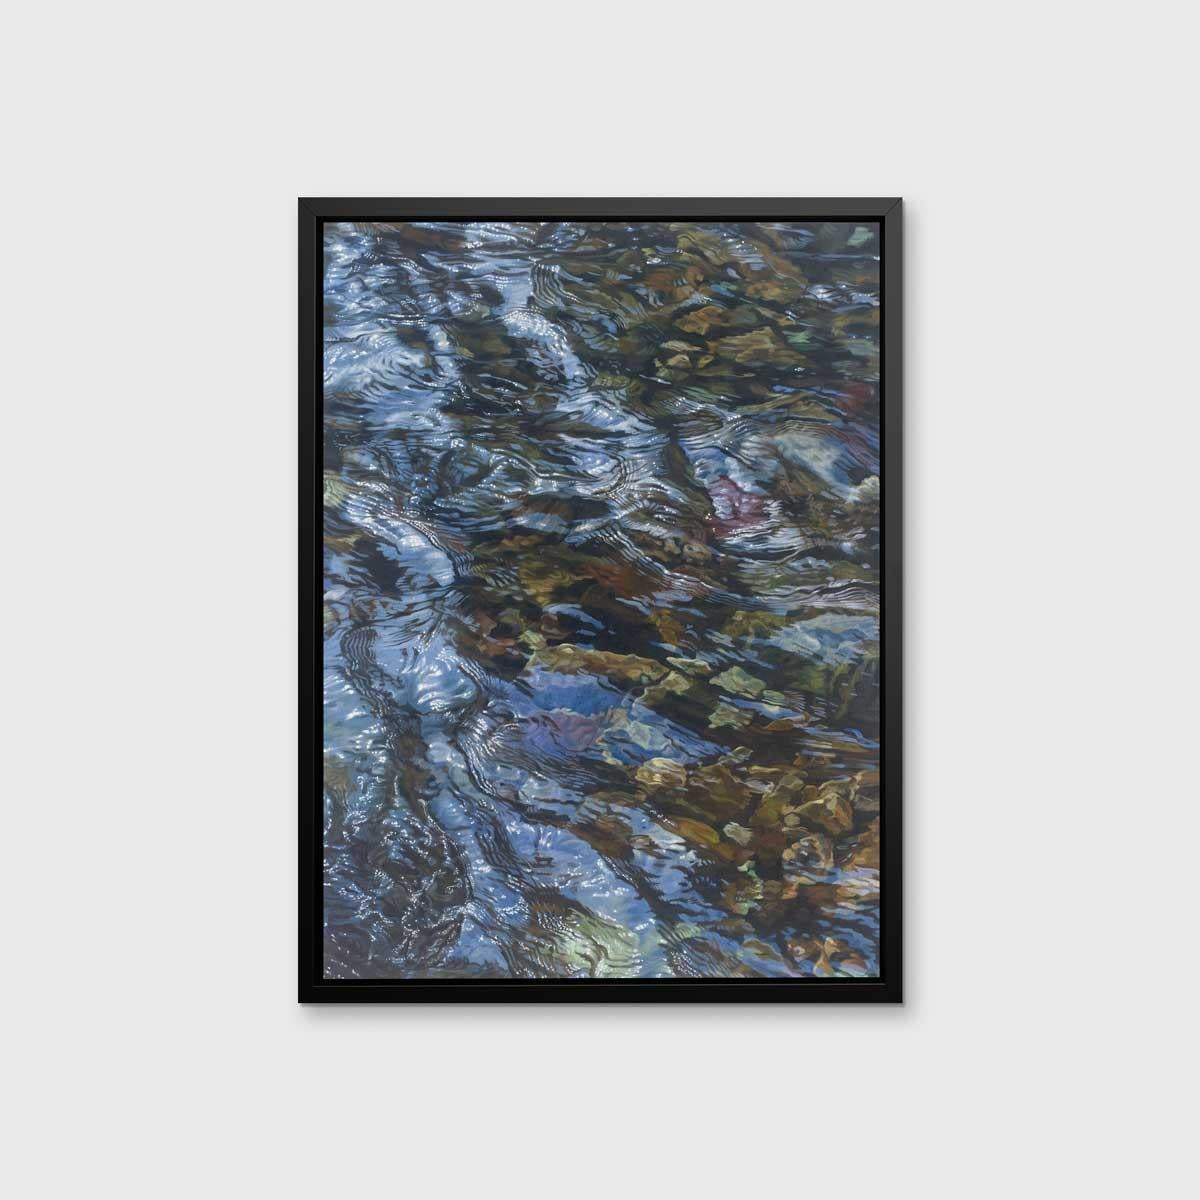 This realistic limited edition print captures a highly detailed, cropped, close-up view of water lightly rippling over rocks. The water reflects light above it to add dimension and depth to the piece. 

This Limited Edition giclee print is an